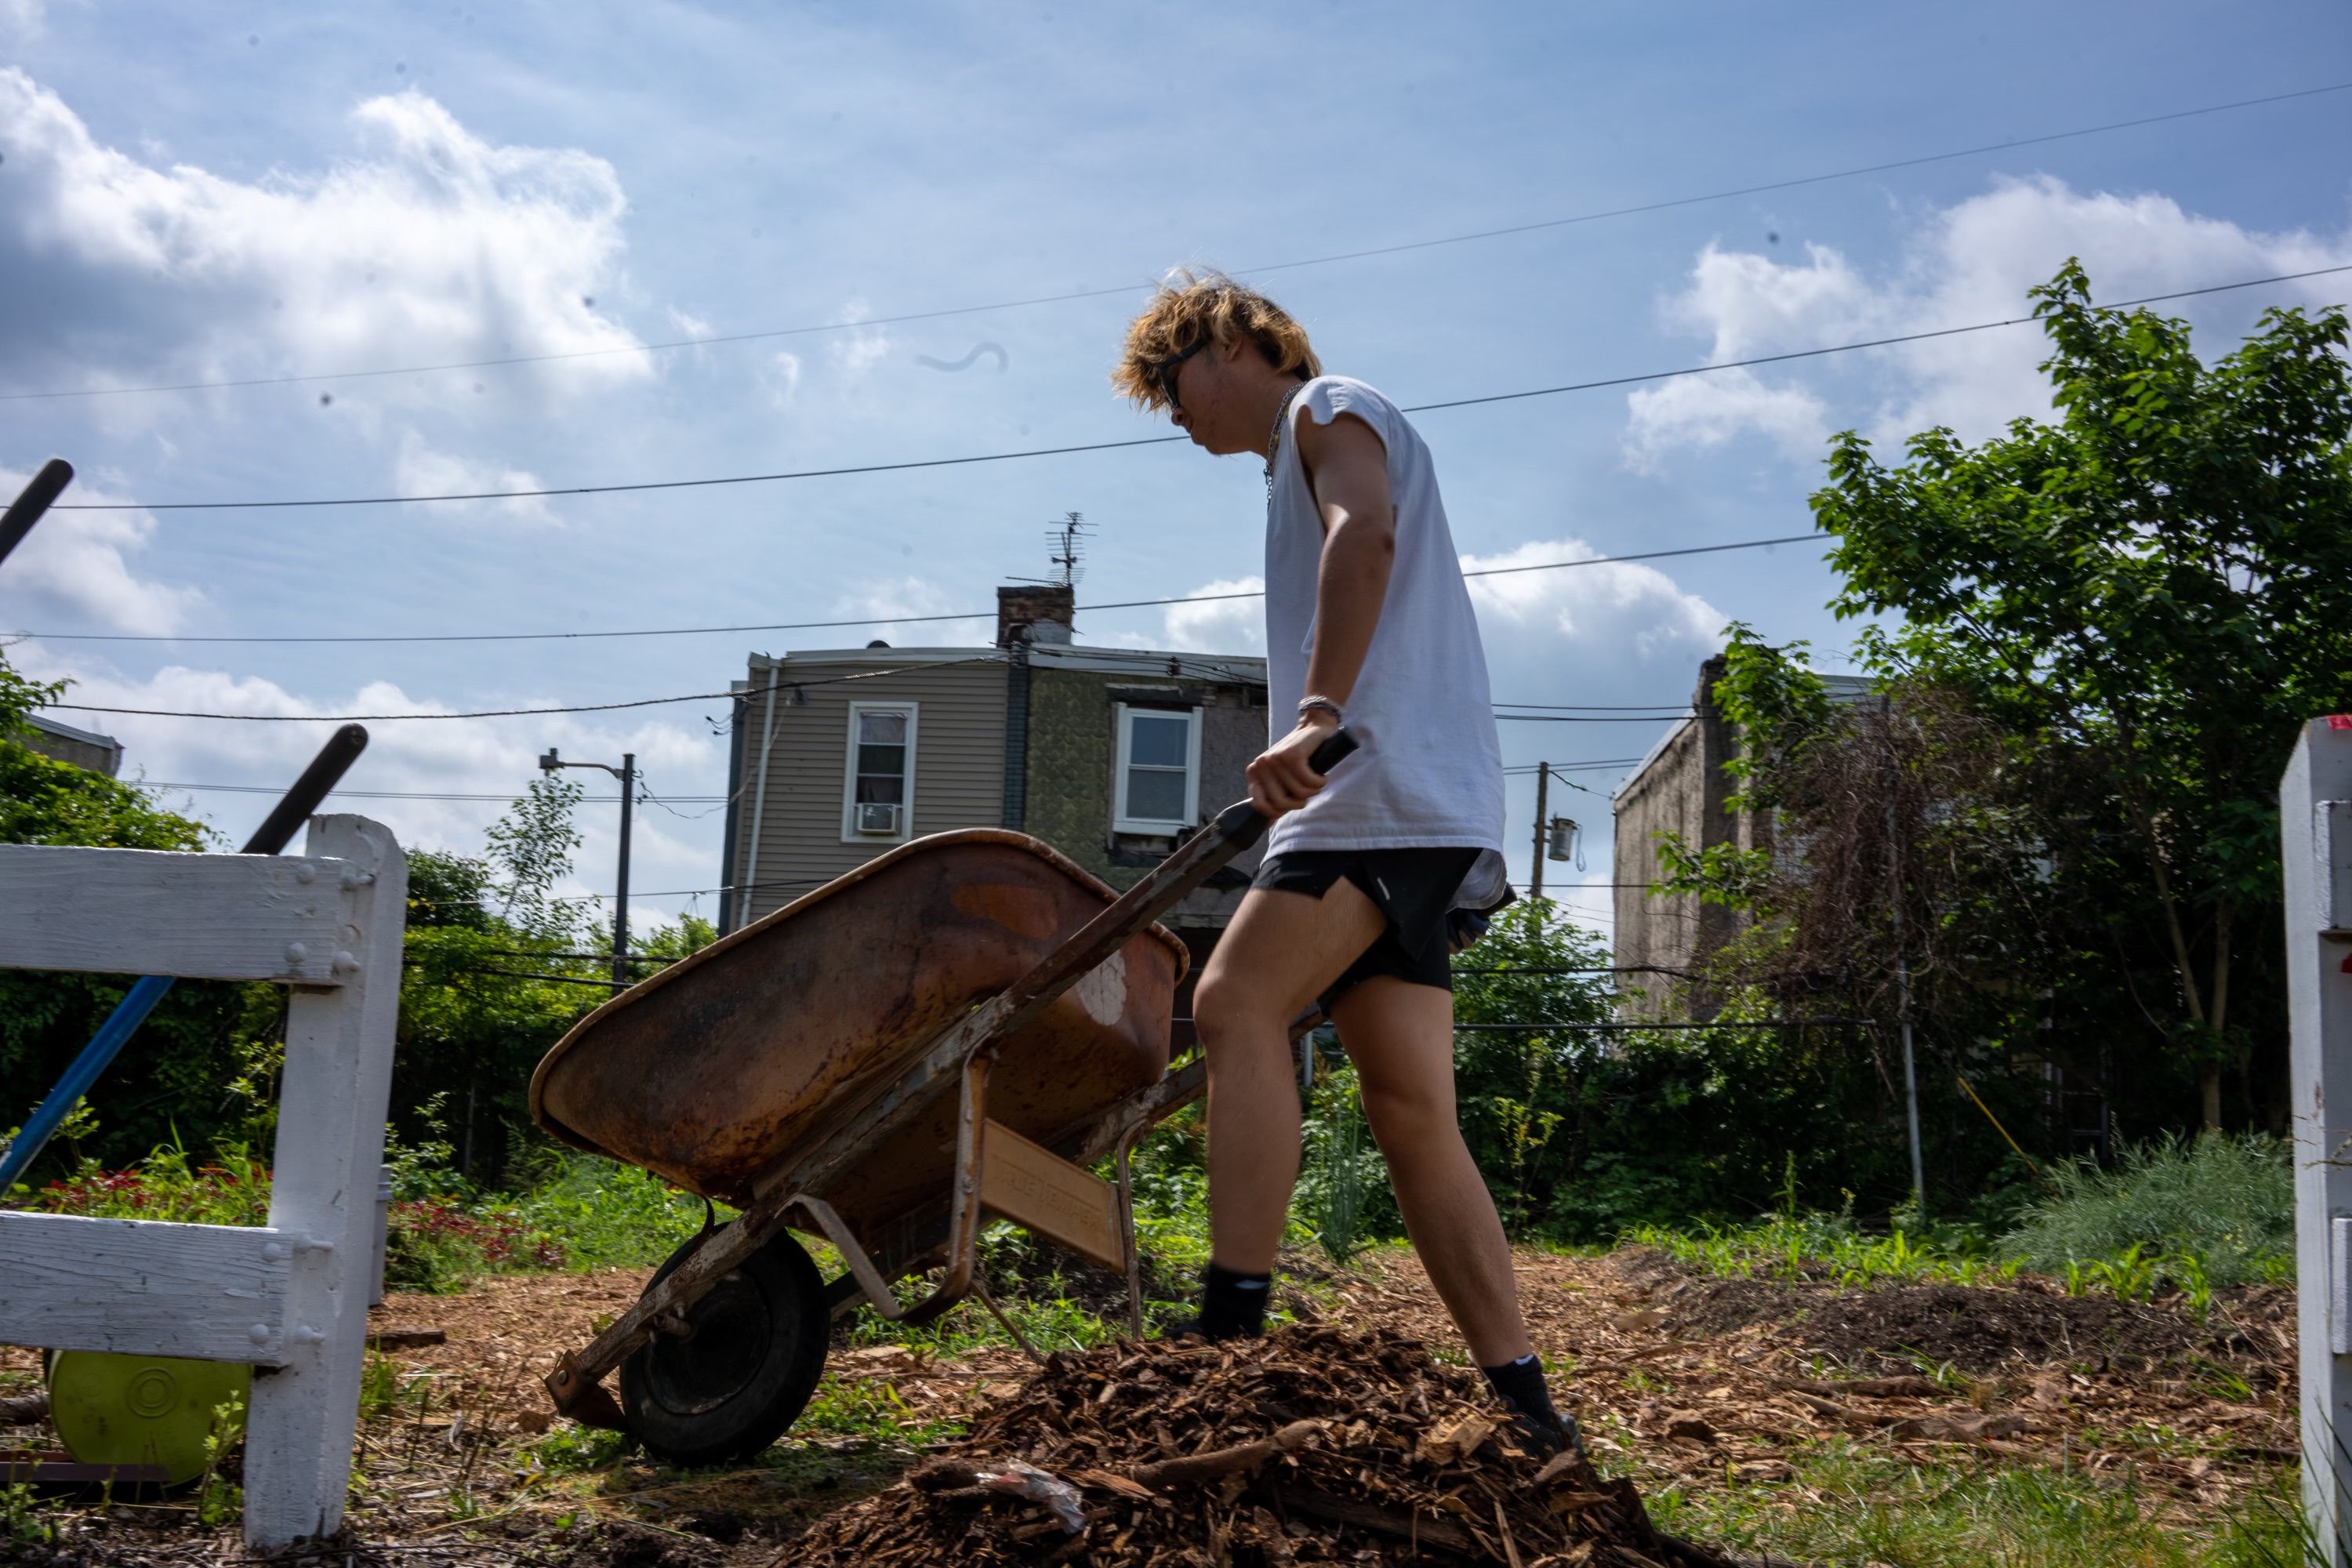 A man pushes a wheelbarrow at one of the community gardens in Southwest Philadelphia.